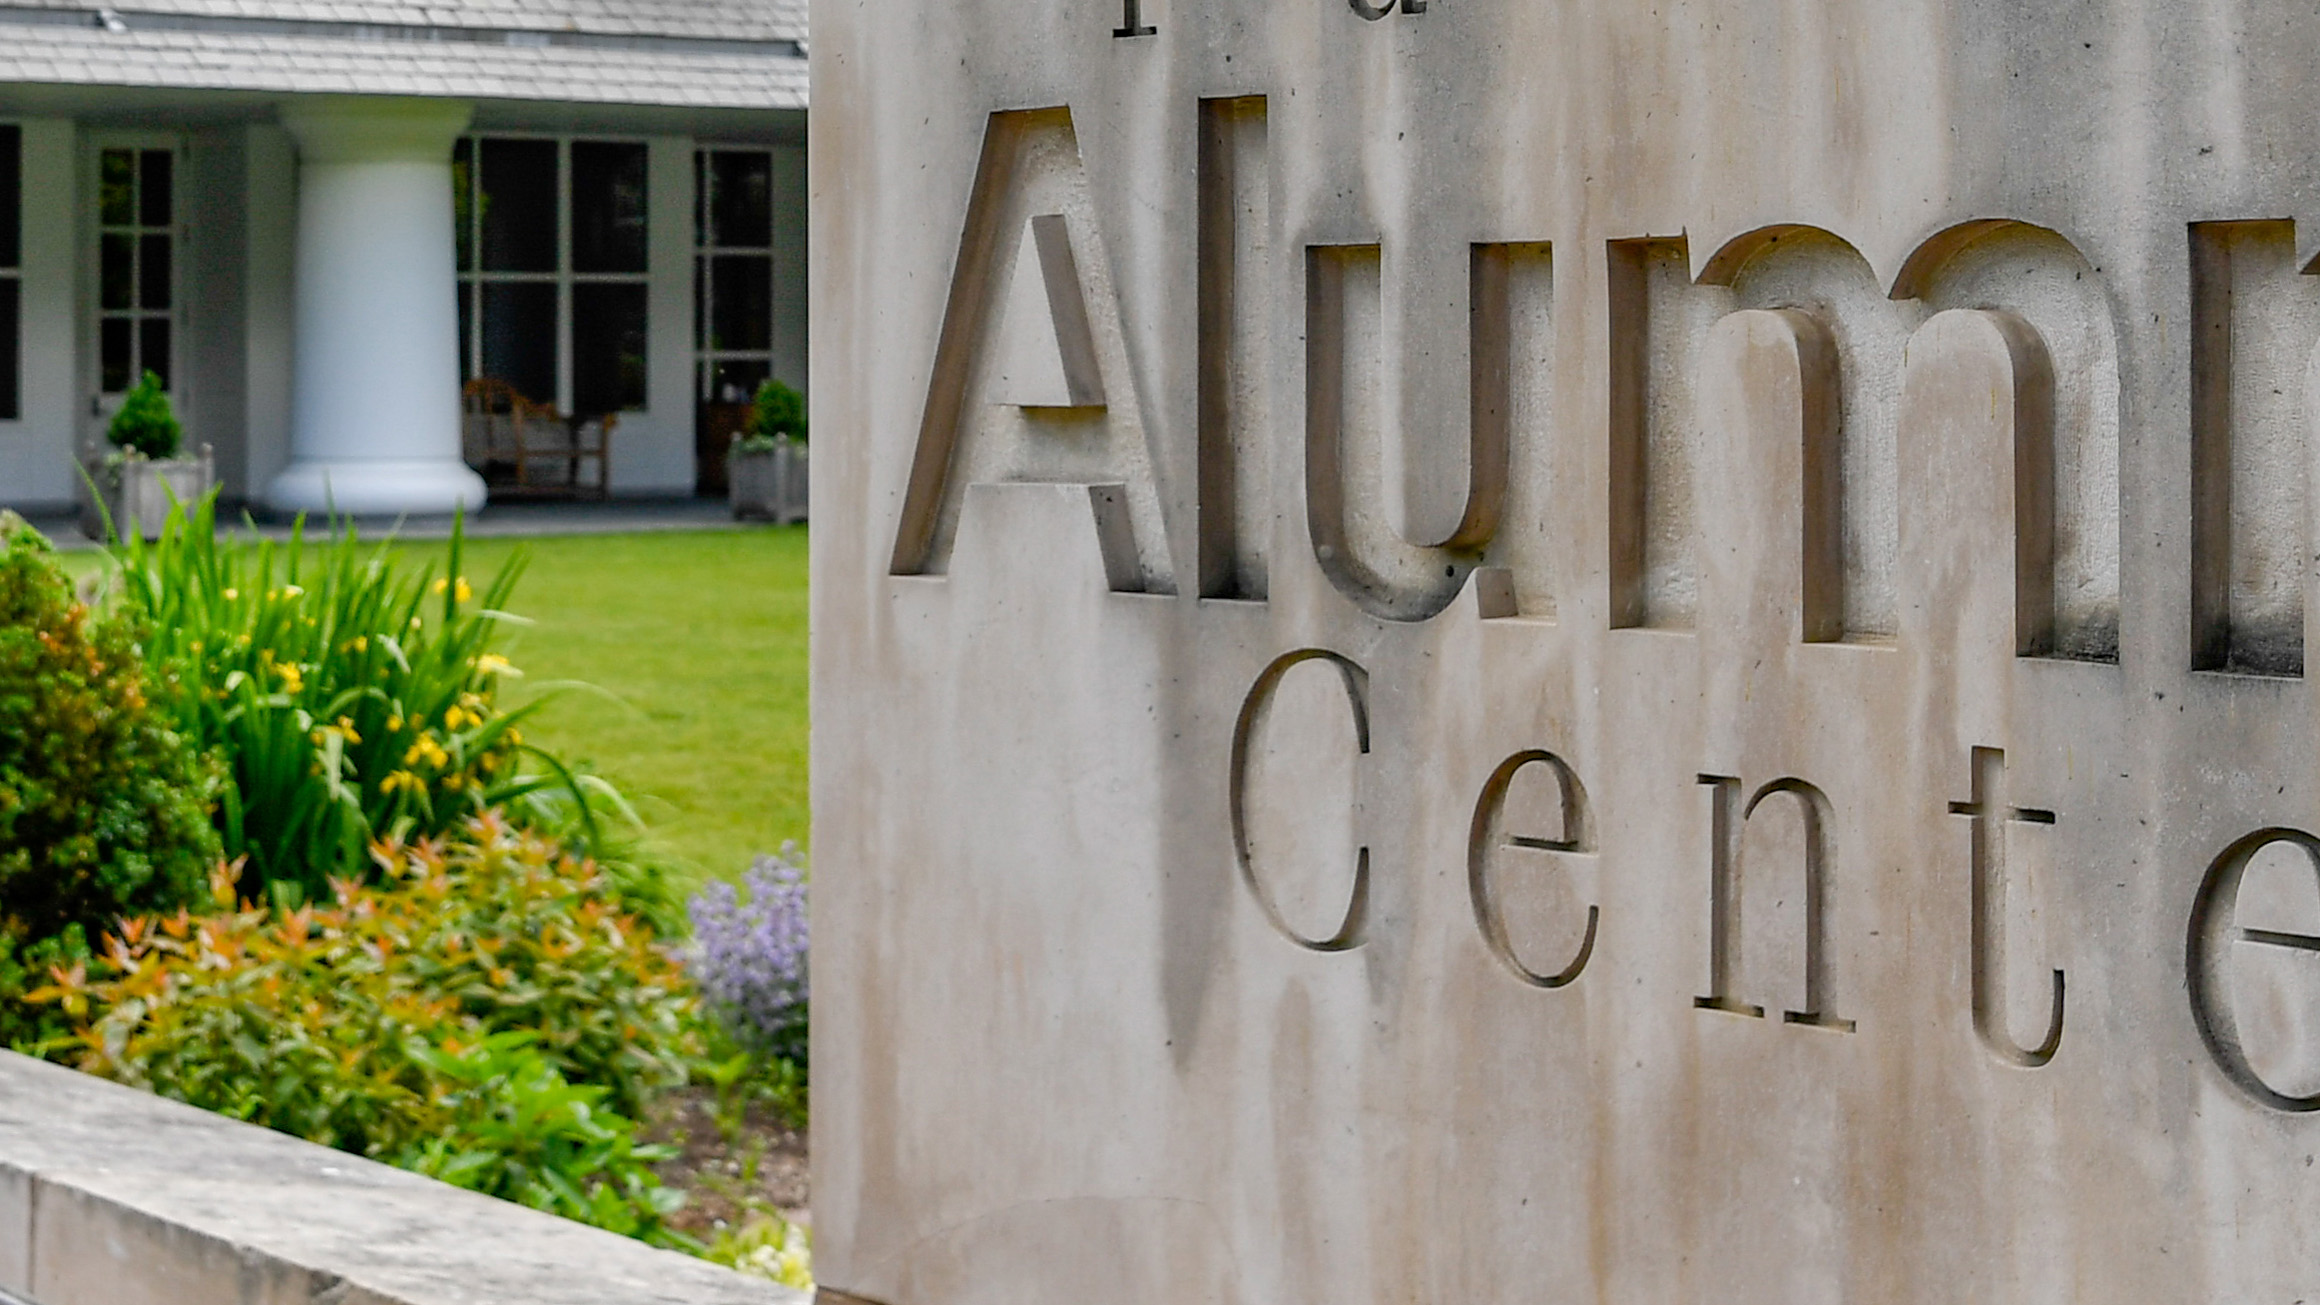 The sign Alumni Center is shown on a stone wall in a garden